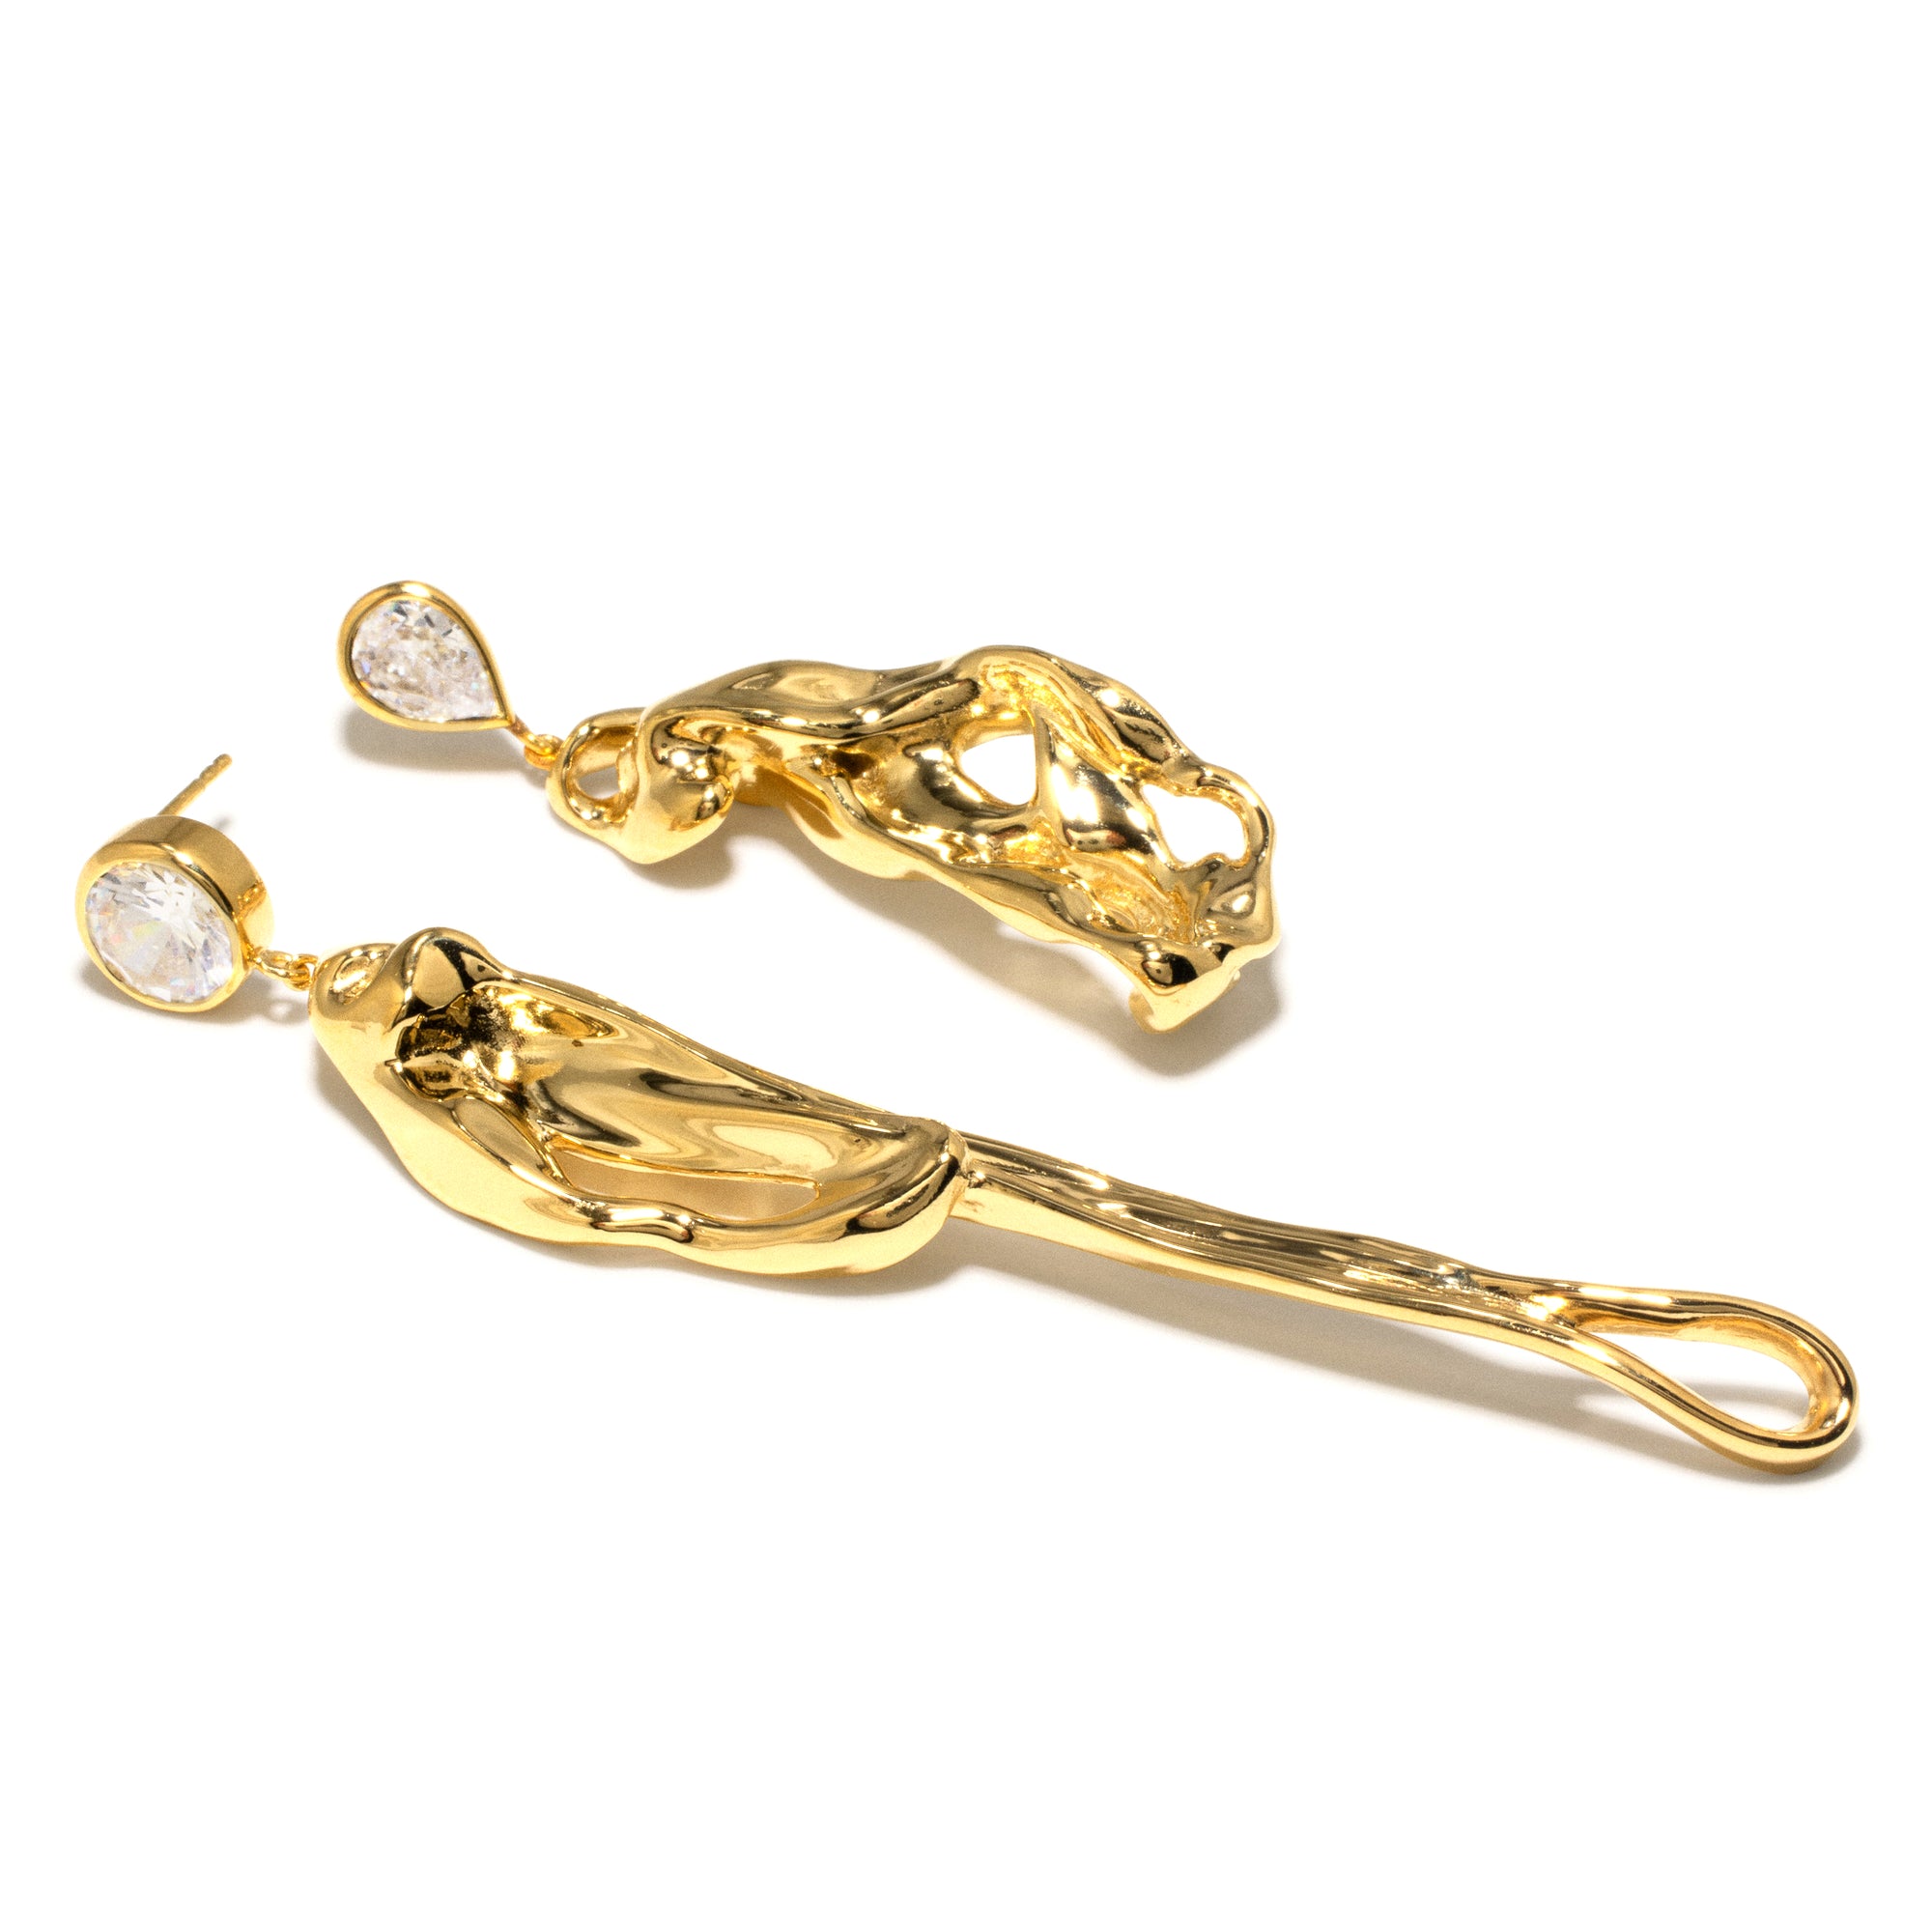 Completedworks - Women's Dreams of Mercury Earrings - (Yellow Gold) view 2